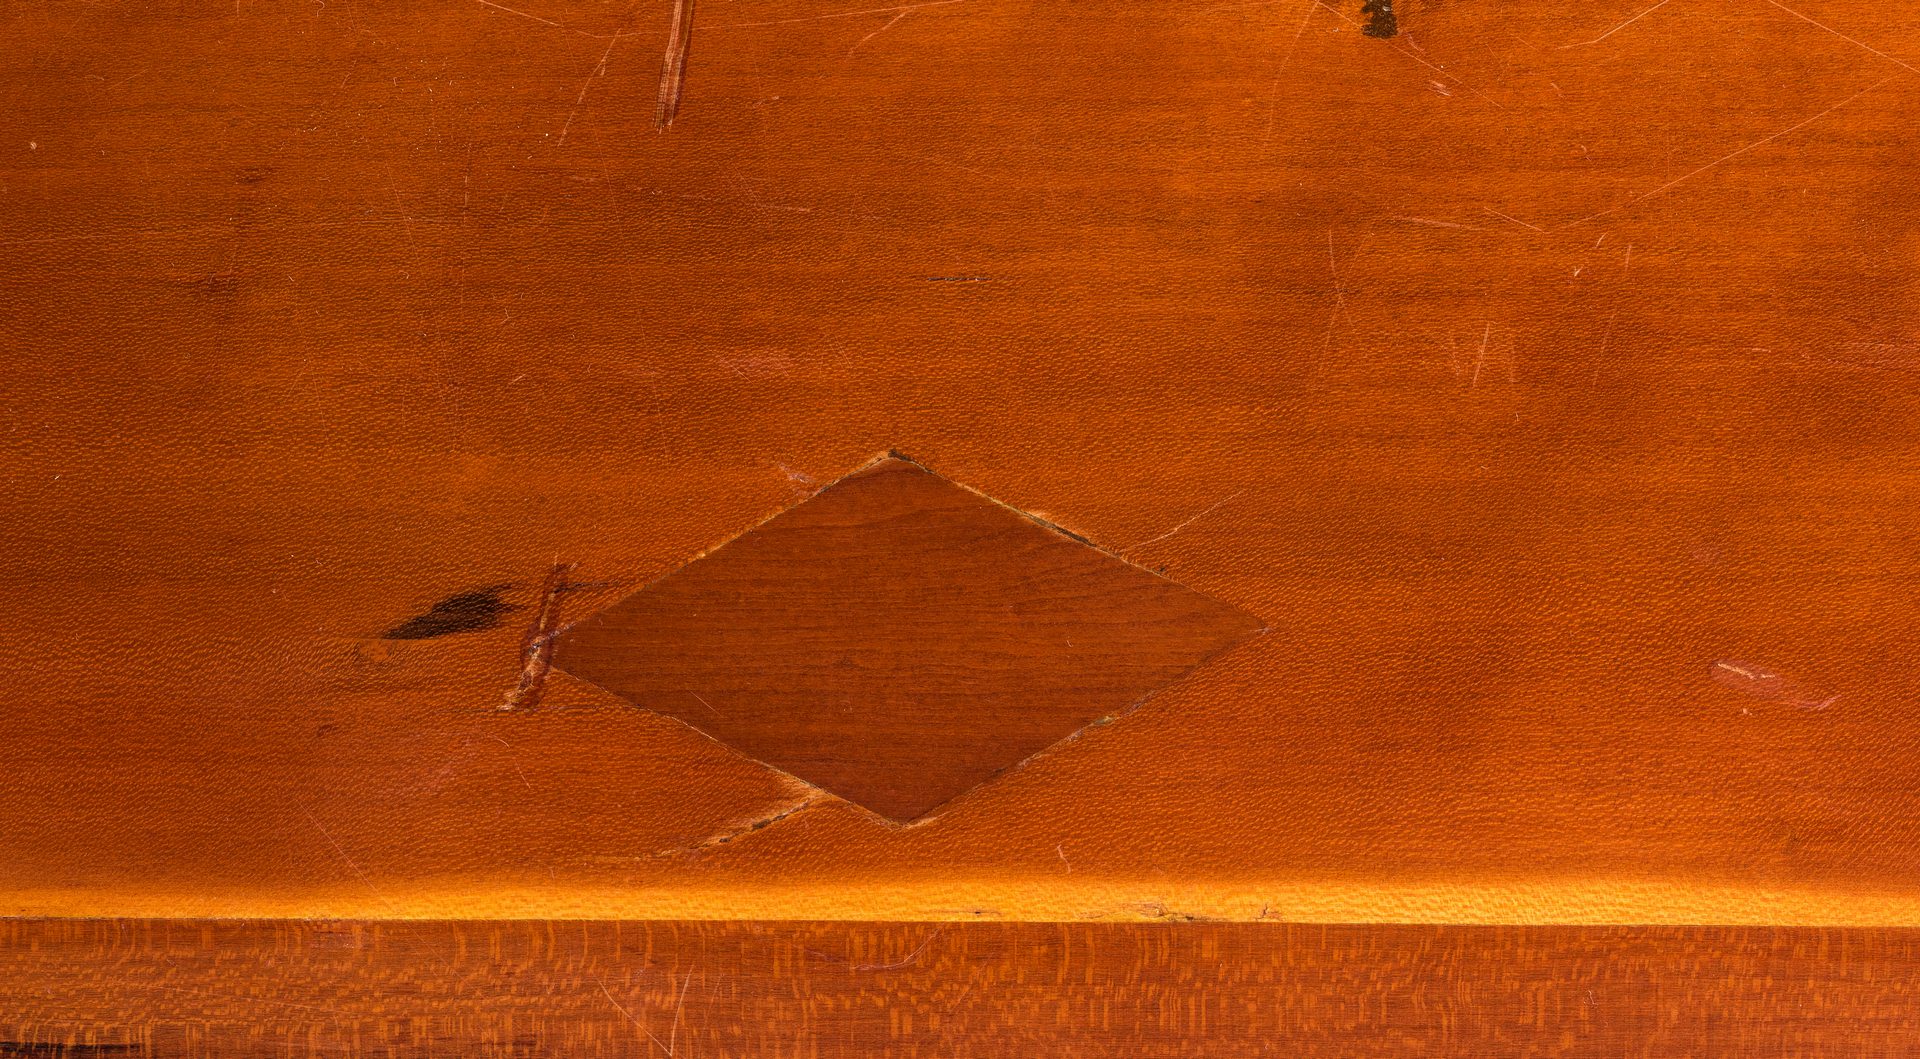 Lot 168: KY Inlaid Federal Chest, attr. Porter Clay